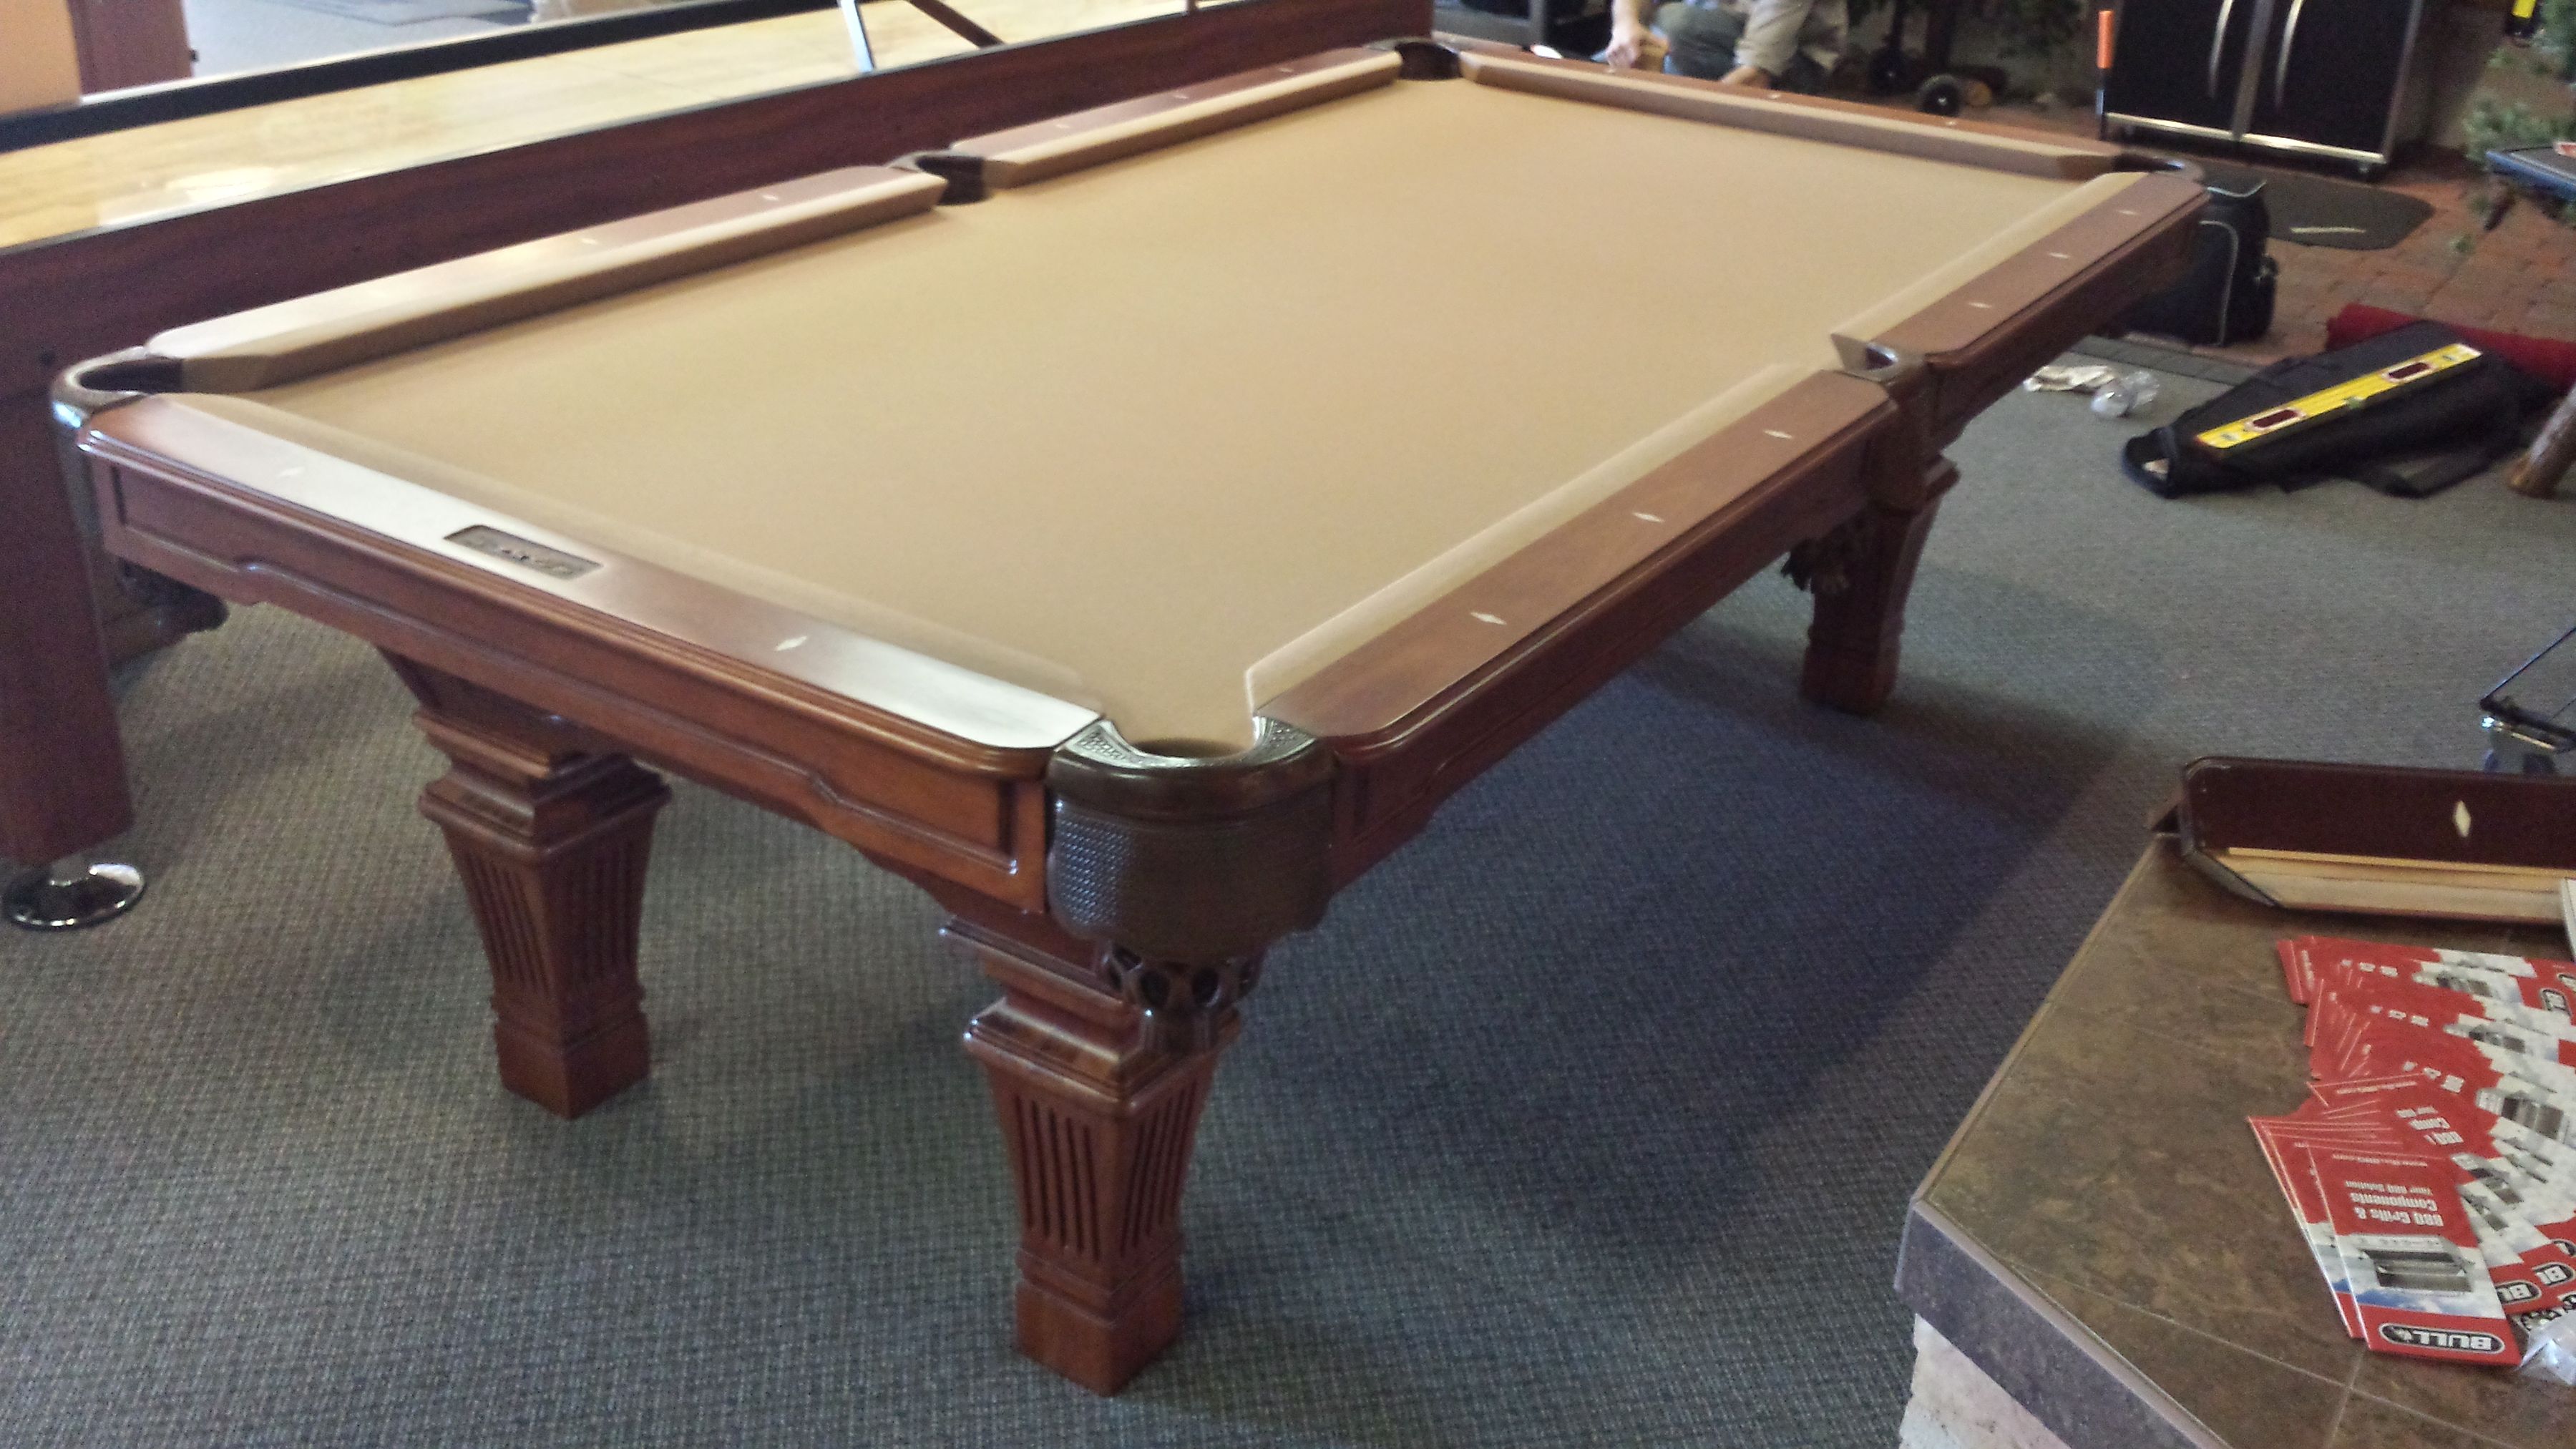 Installed new Presidential Billiards table for my friends at Spas Of Parker.